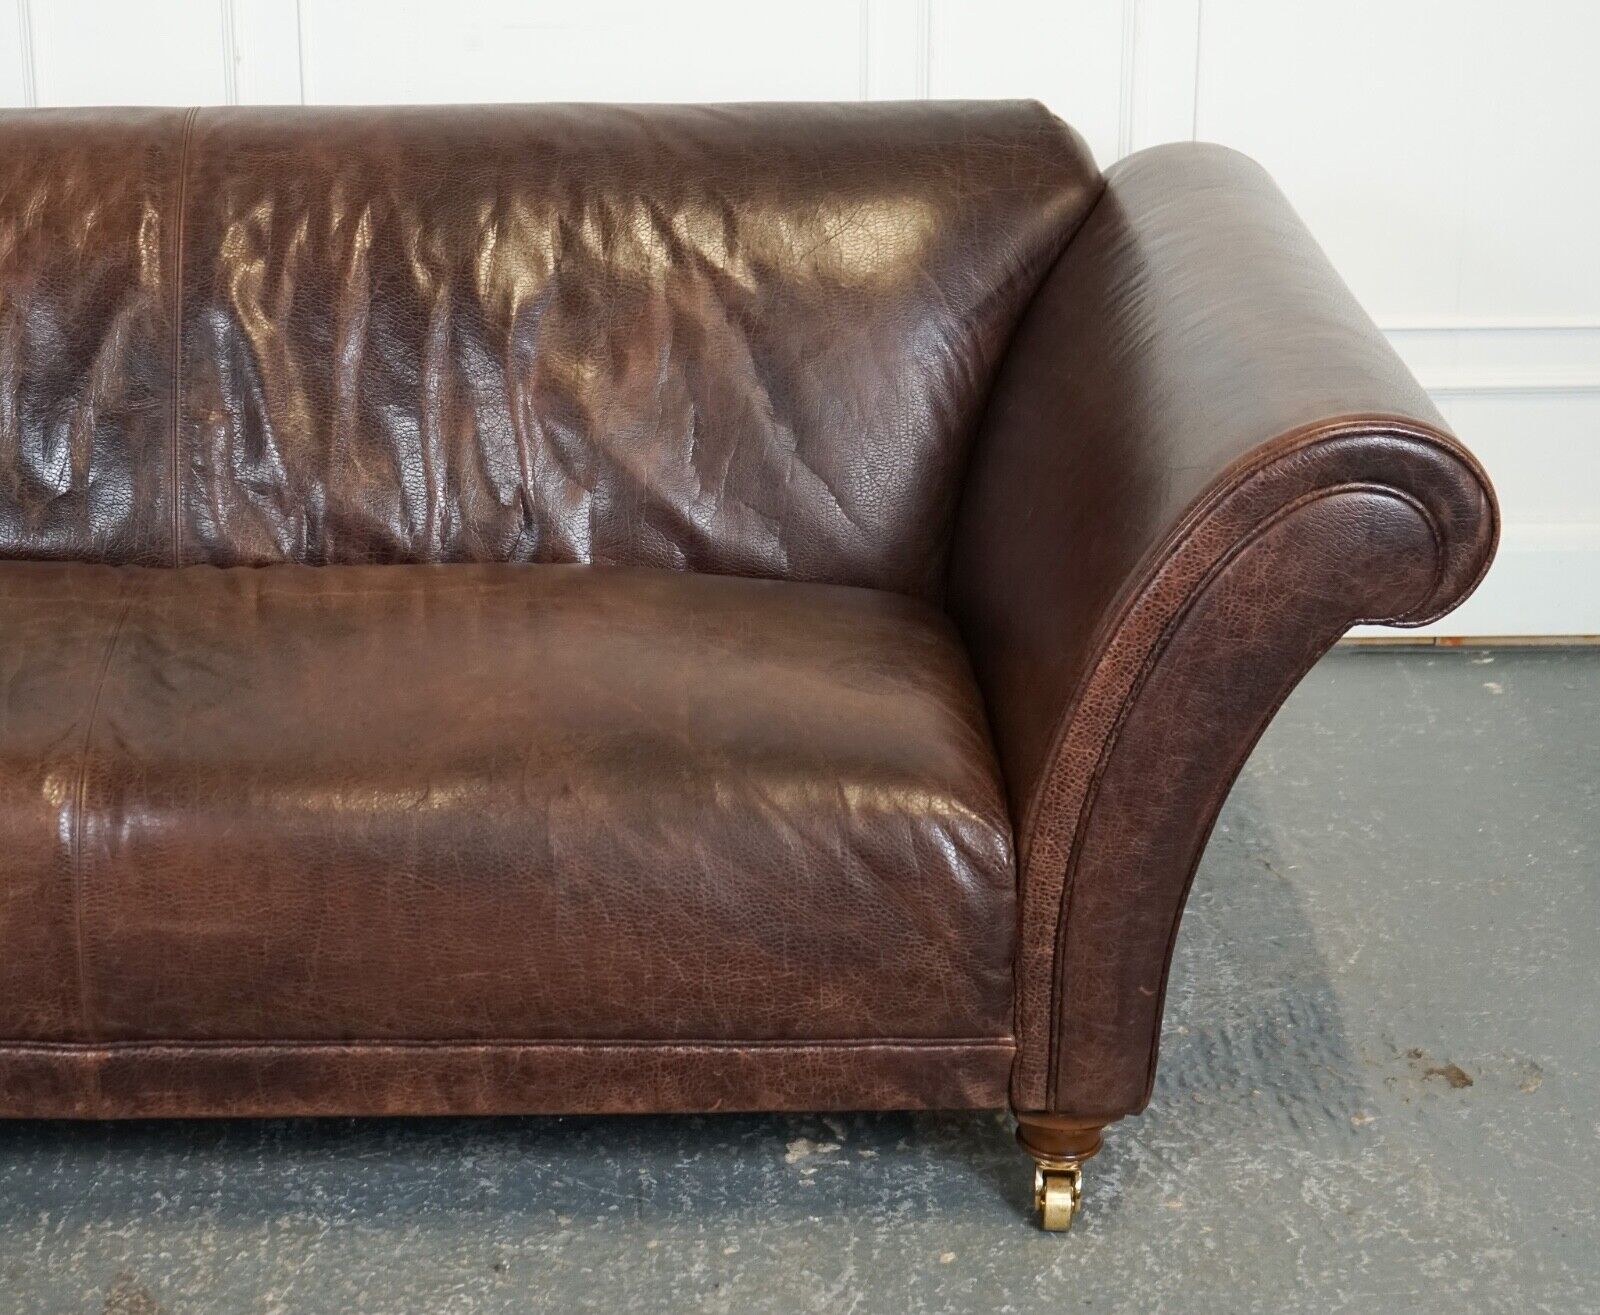 STUNNING FISHPOOLS HERITAGE BROWN LEATHER 2 TO 3 SEATER SOFA